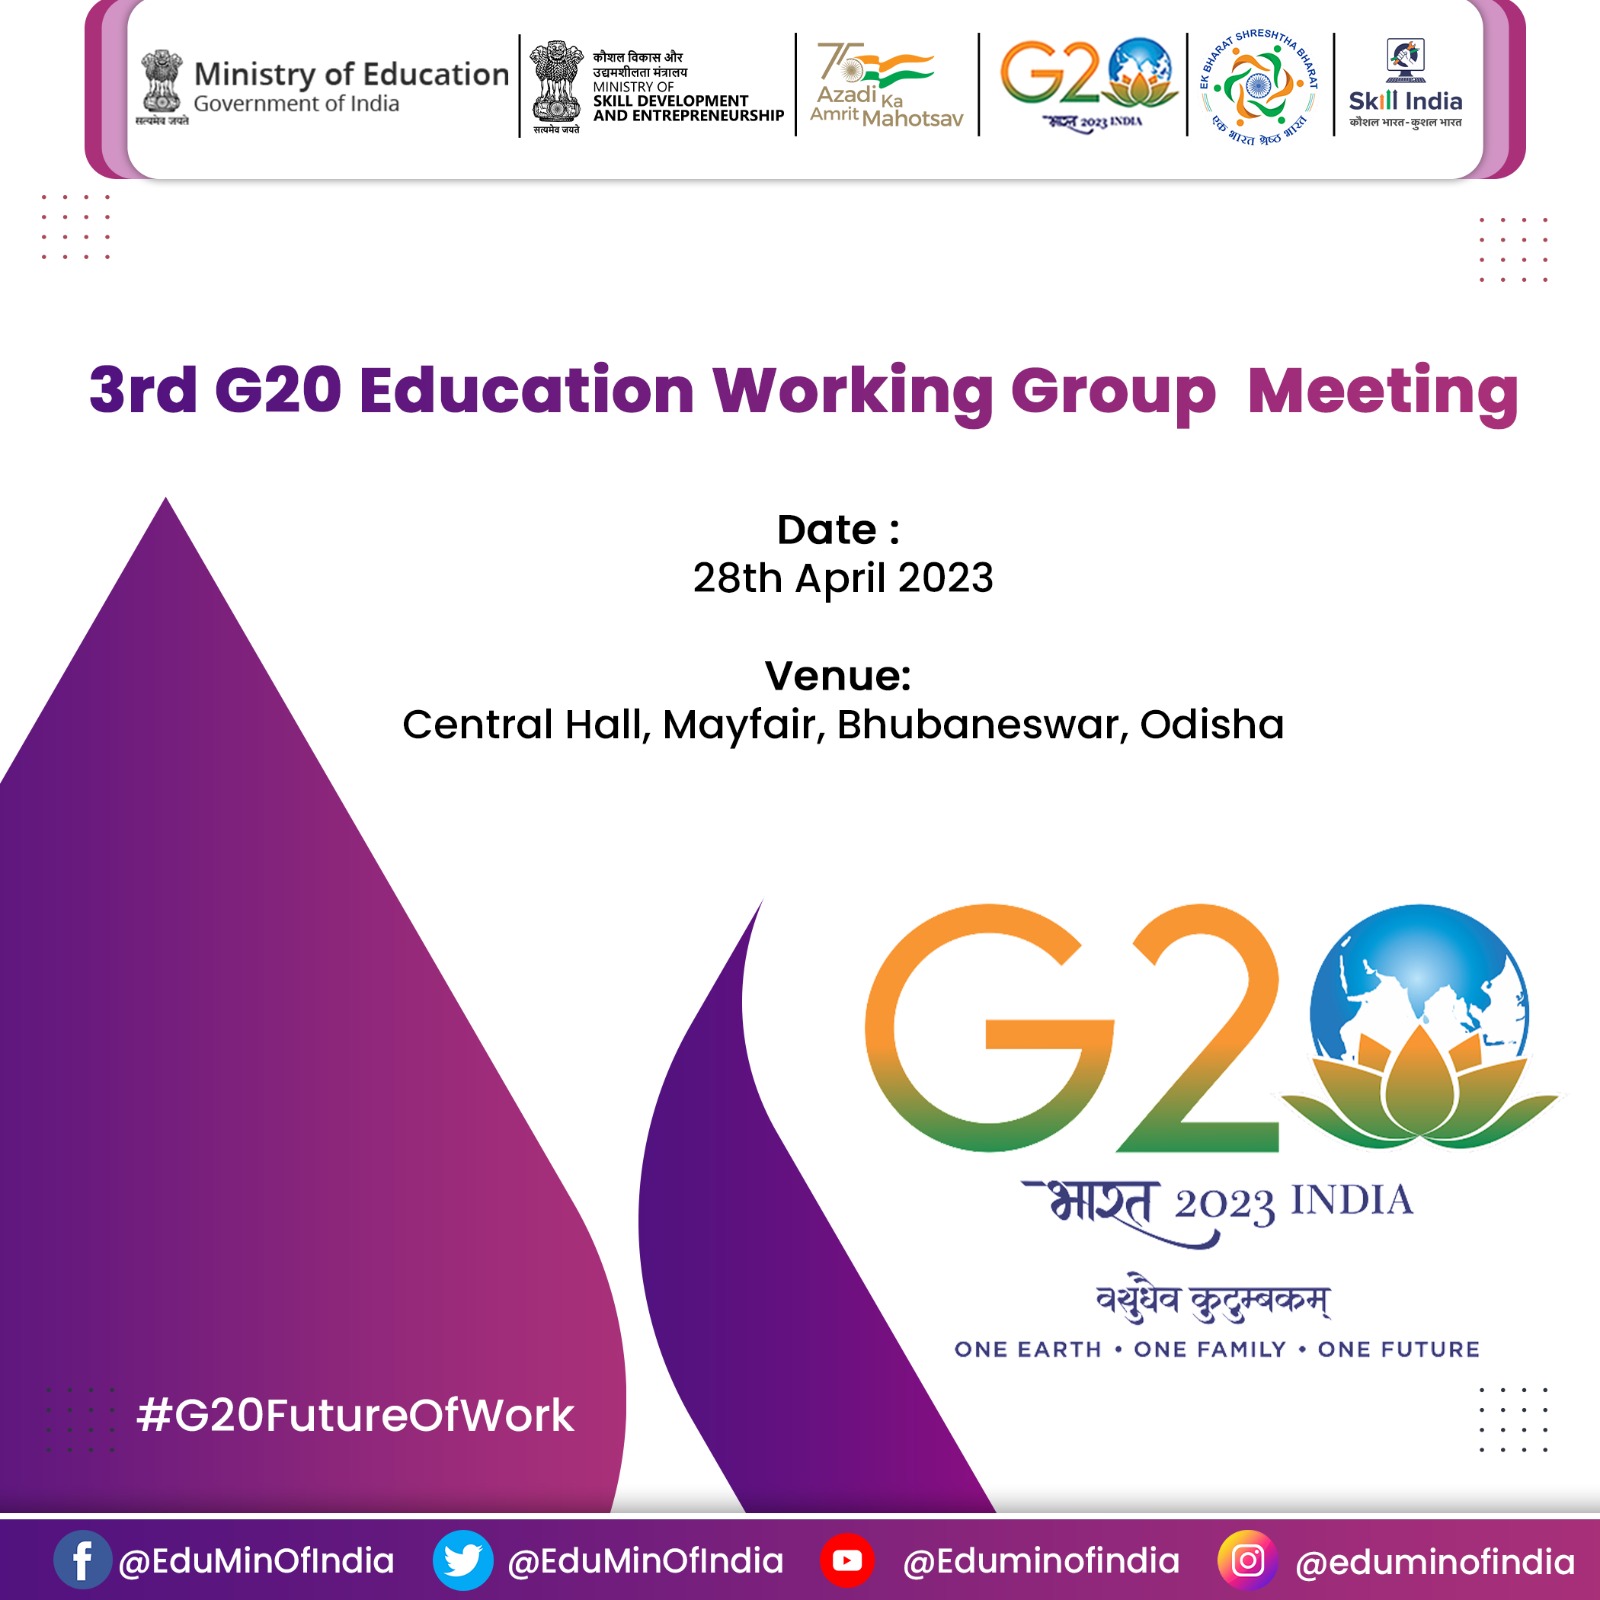 At Day 3 of G20 Education Working